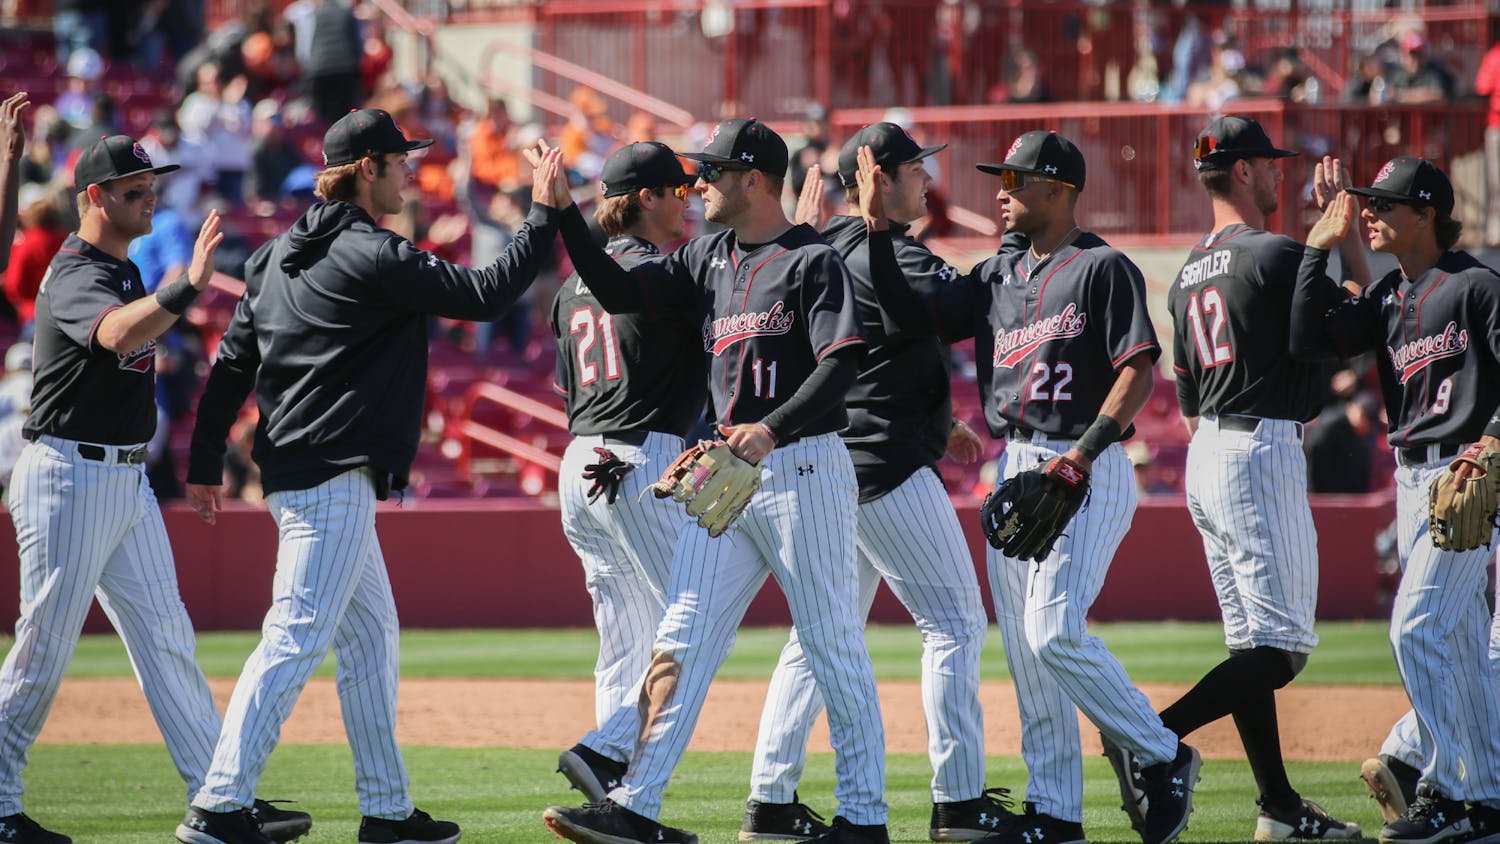 The South Carolina baseball team celebrates a win after the first game of the day on March 13, 2022. The Gamecocks defeated Texas in a three-game series at Founders Park in Columbia, SC.